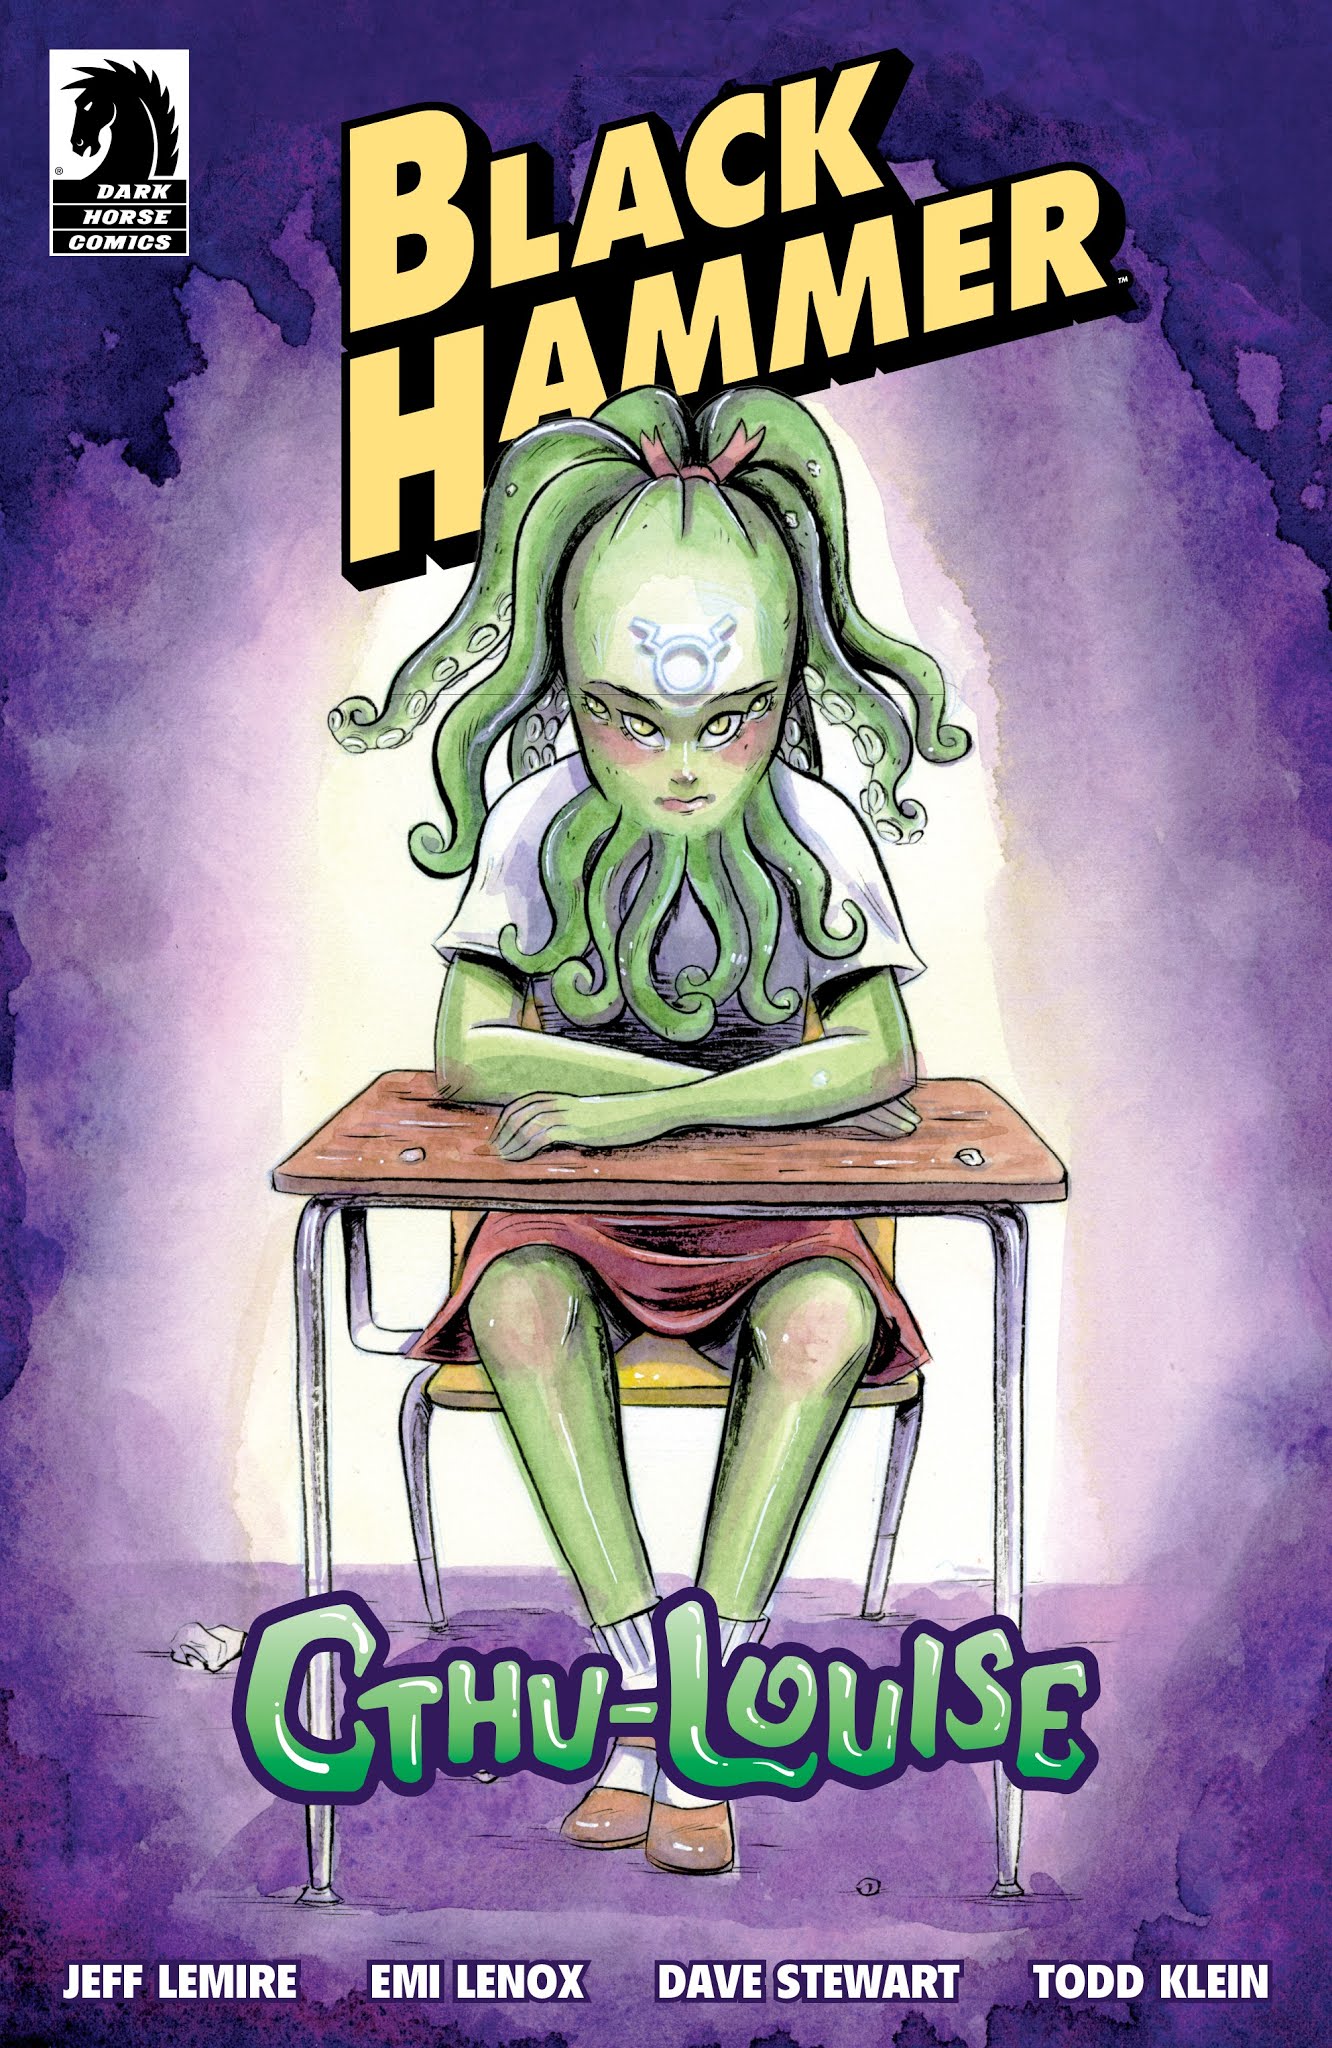 Read online Black Hammer: Cthu-Louise comic -  Issue # Full - 1